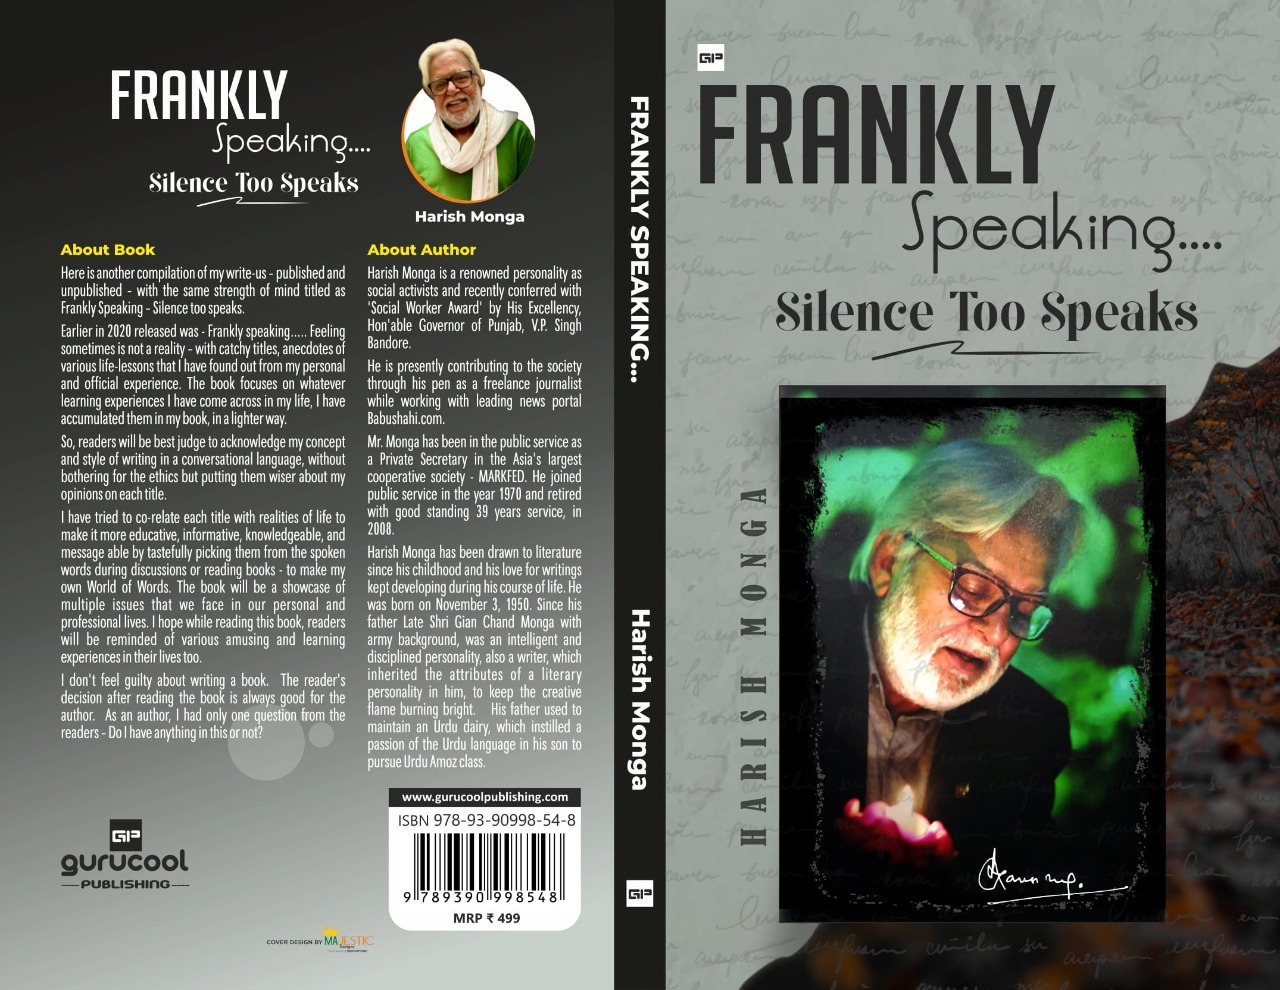 My next title - Frankly Speaking-Silence too speaks